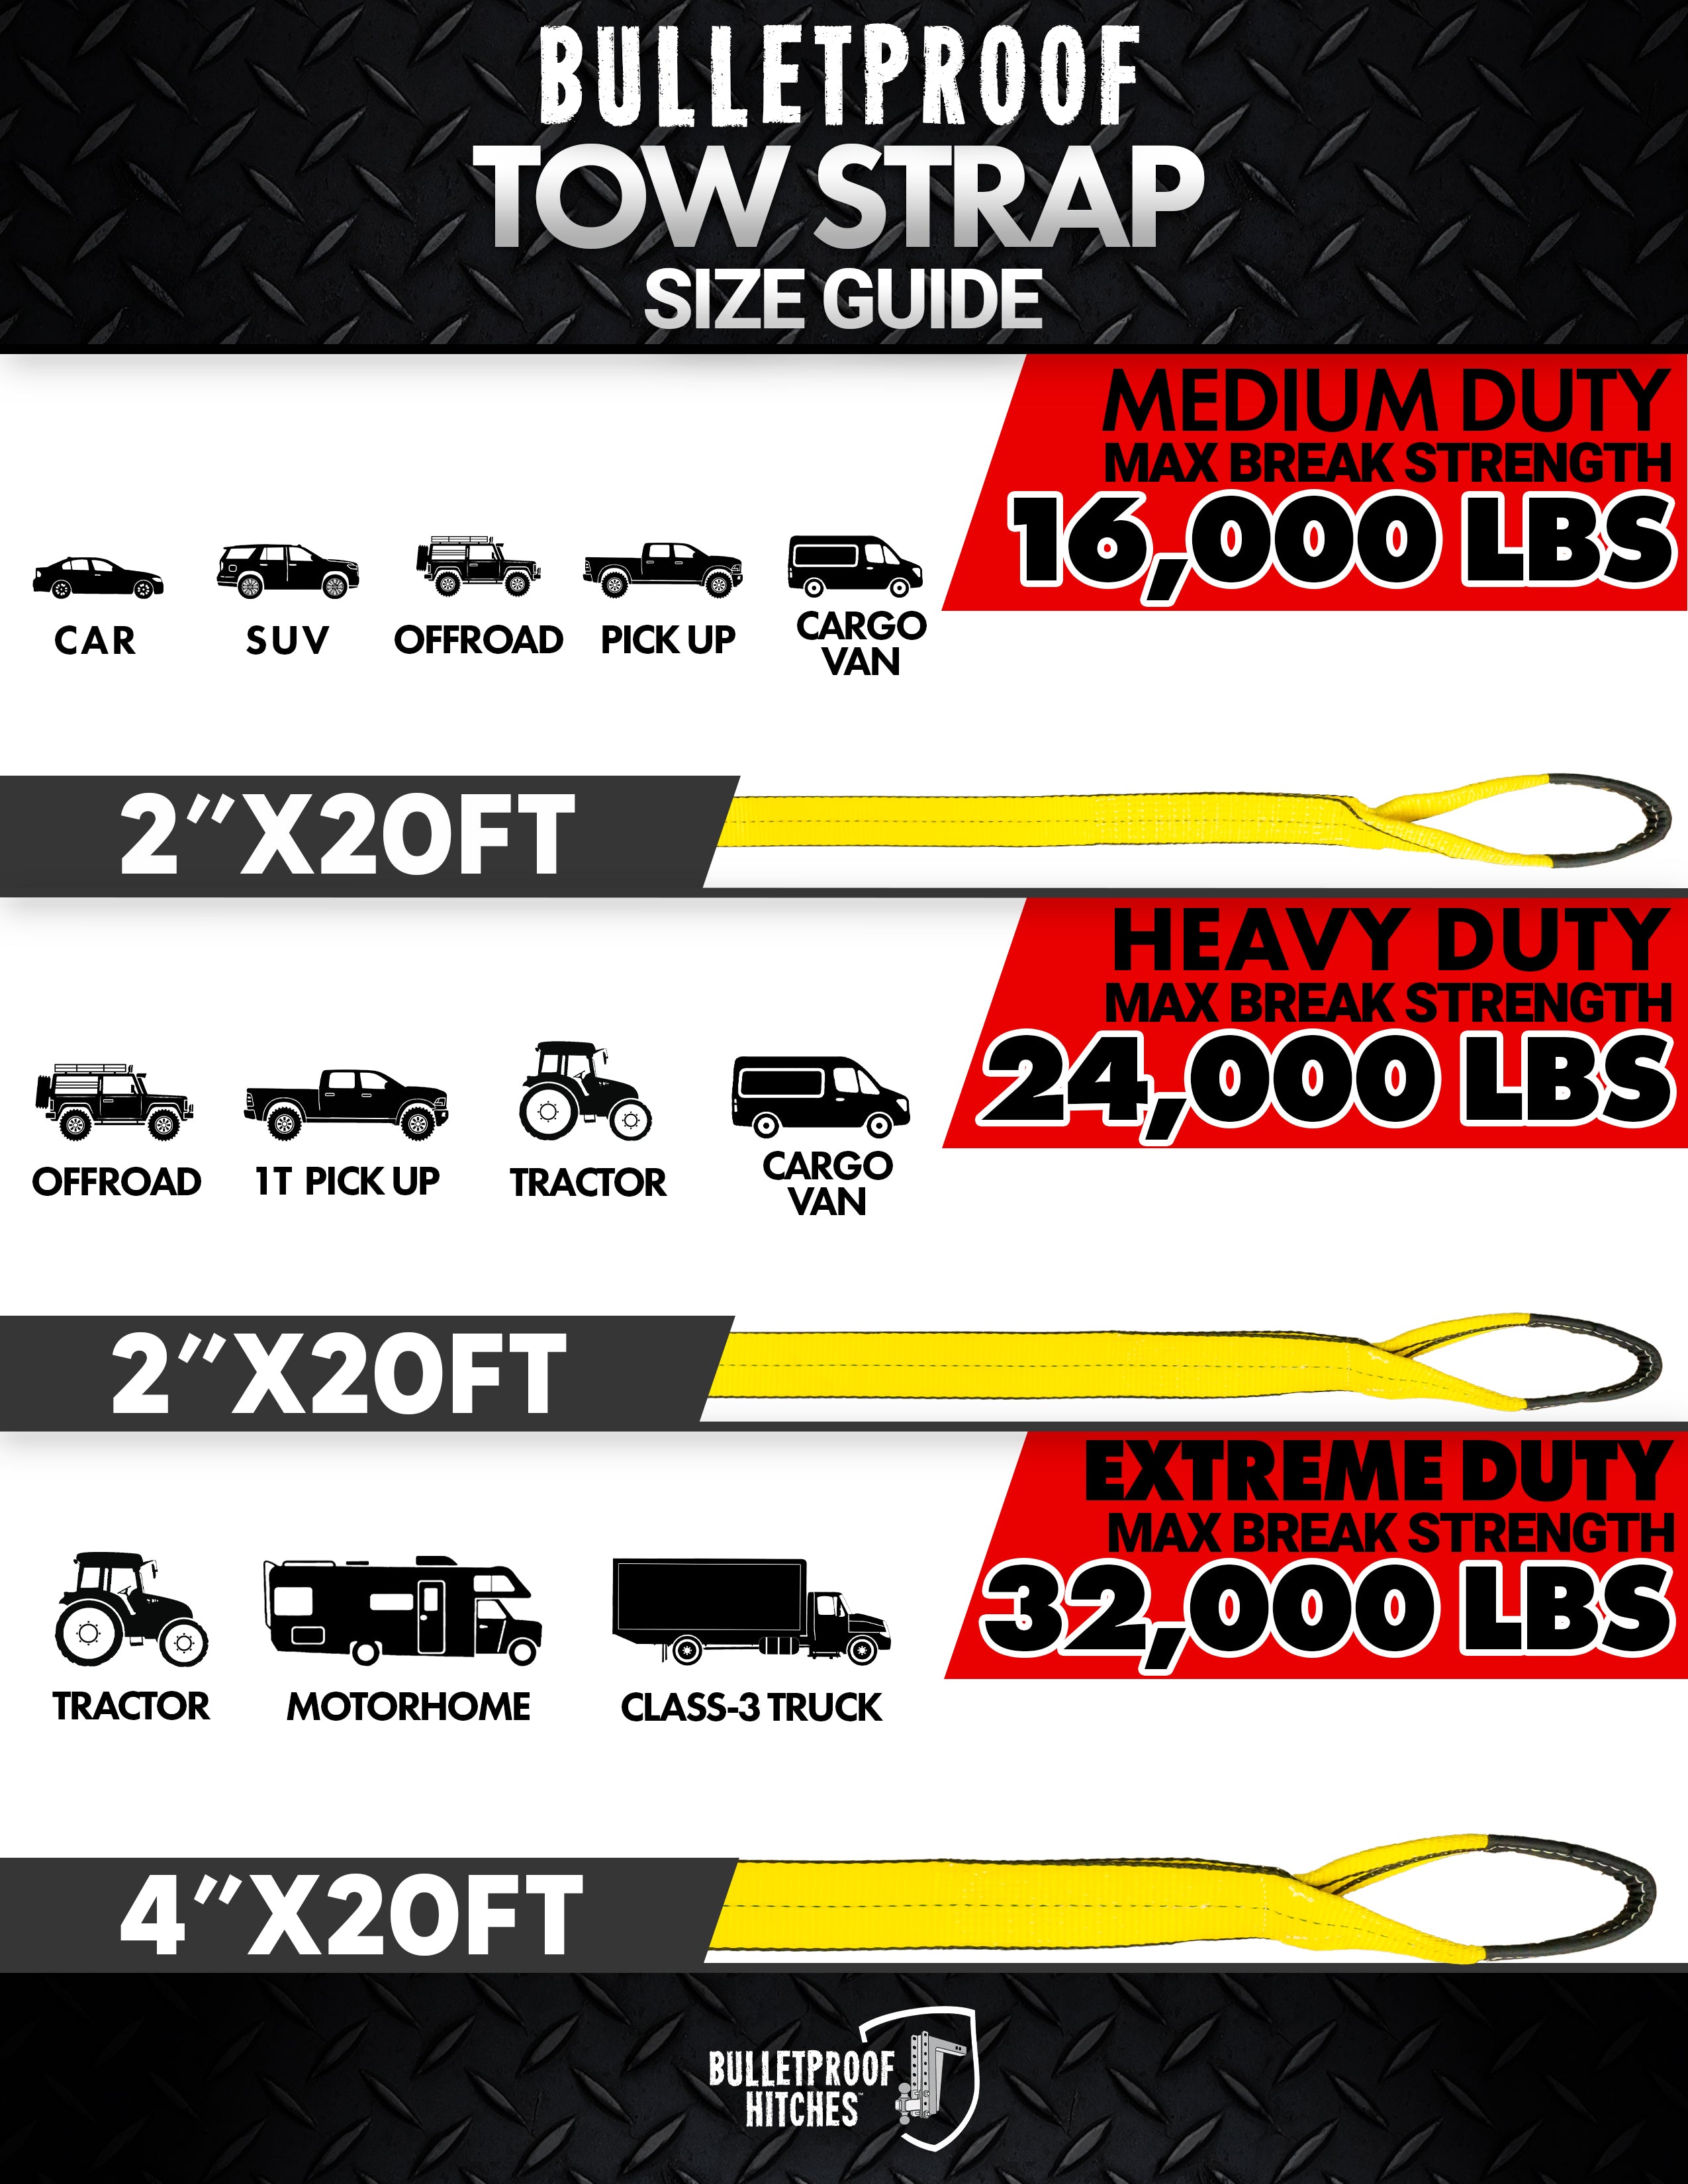 The BulletProof Tow Strap Guide